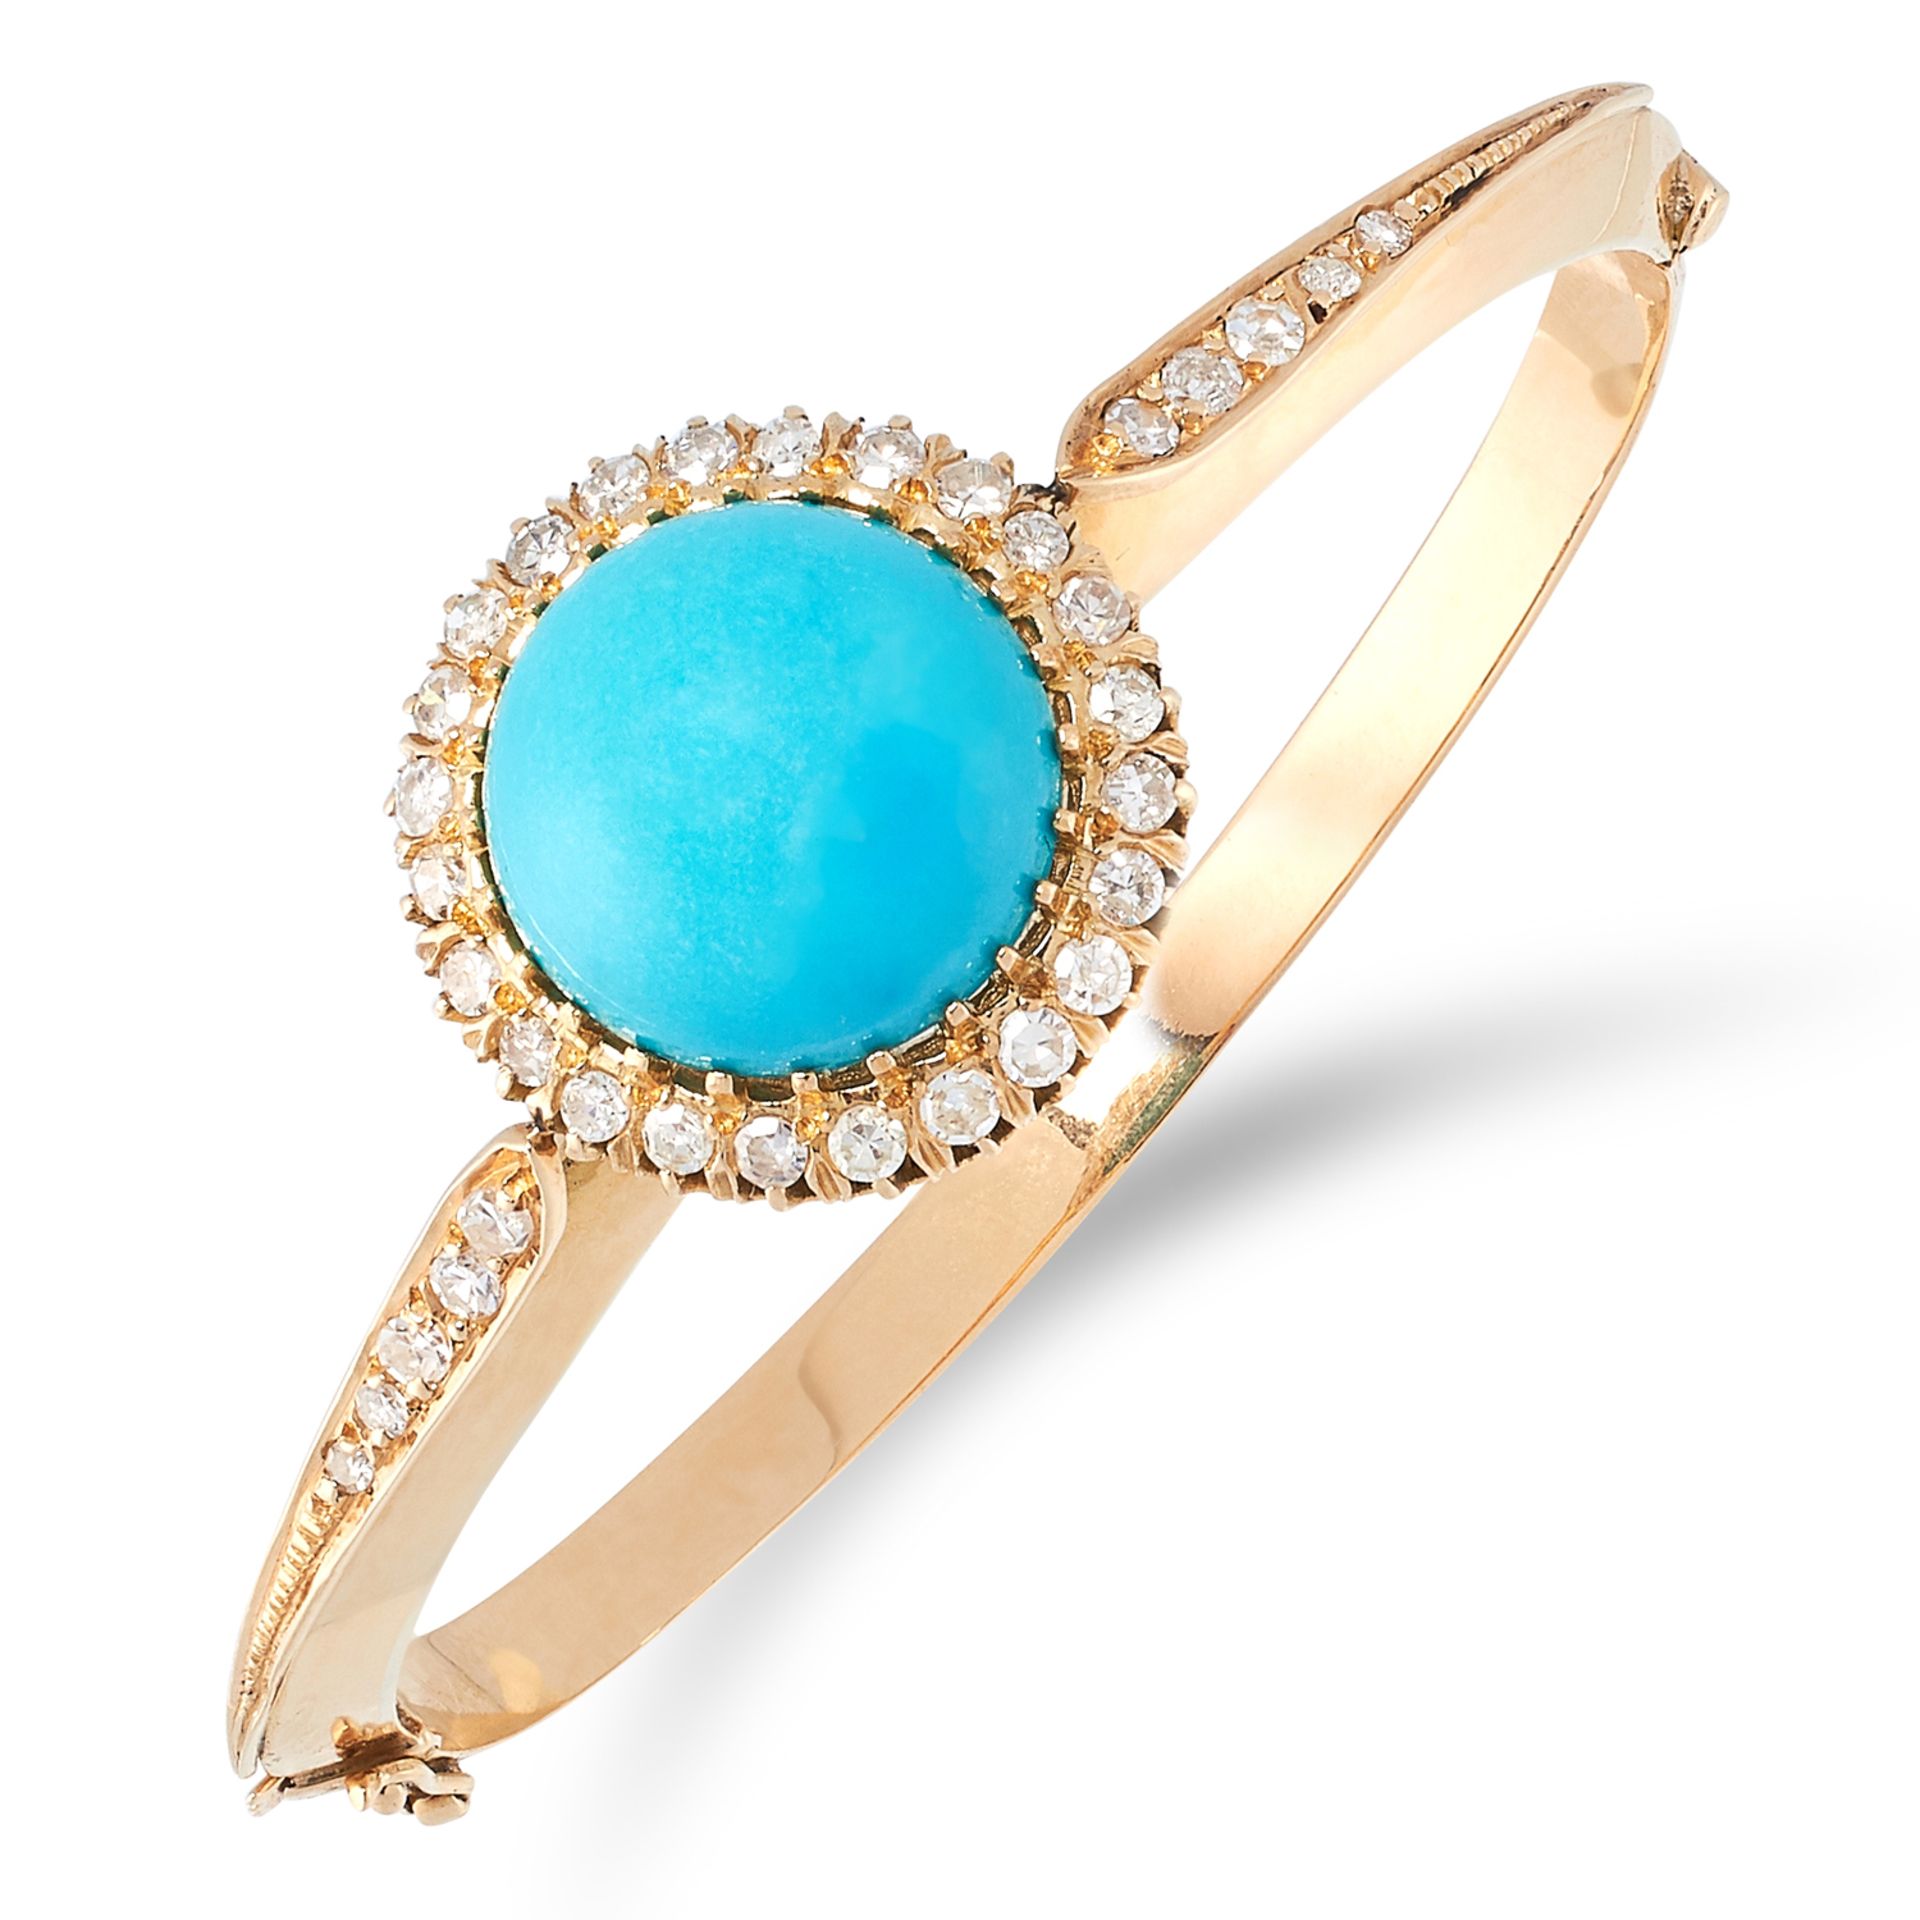 A TURQUOISE AND DIAMOND BANGLE set with cabochon turquoise in a border of round cut diamonds, French